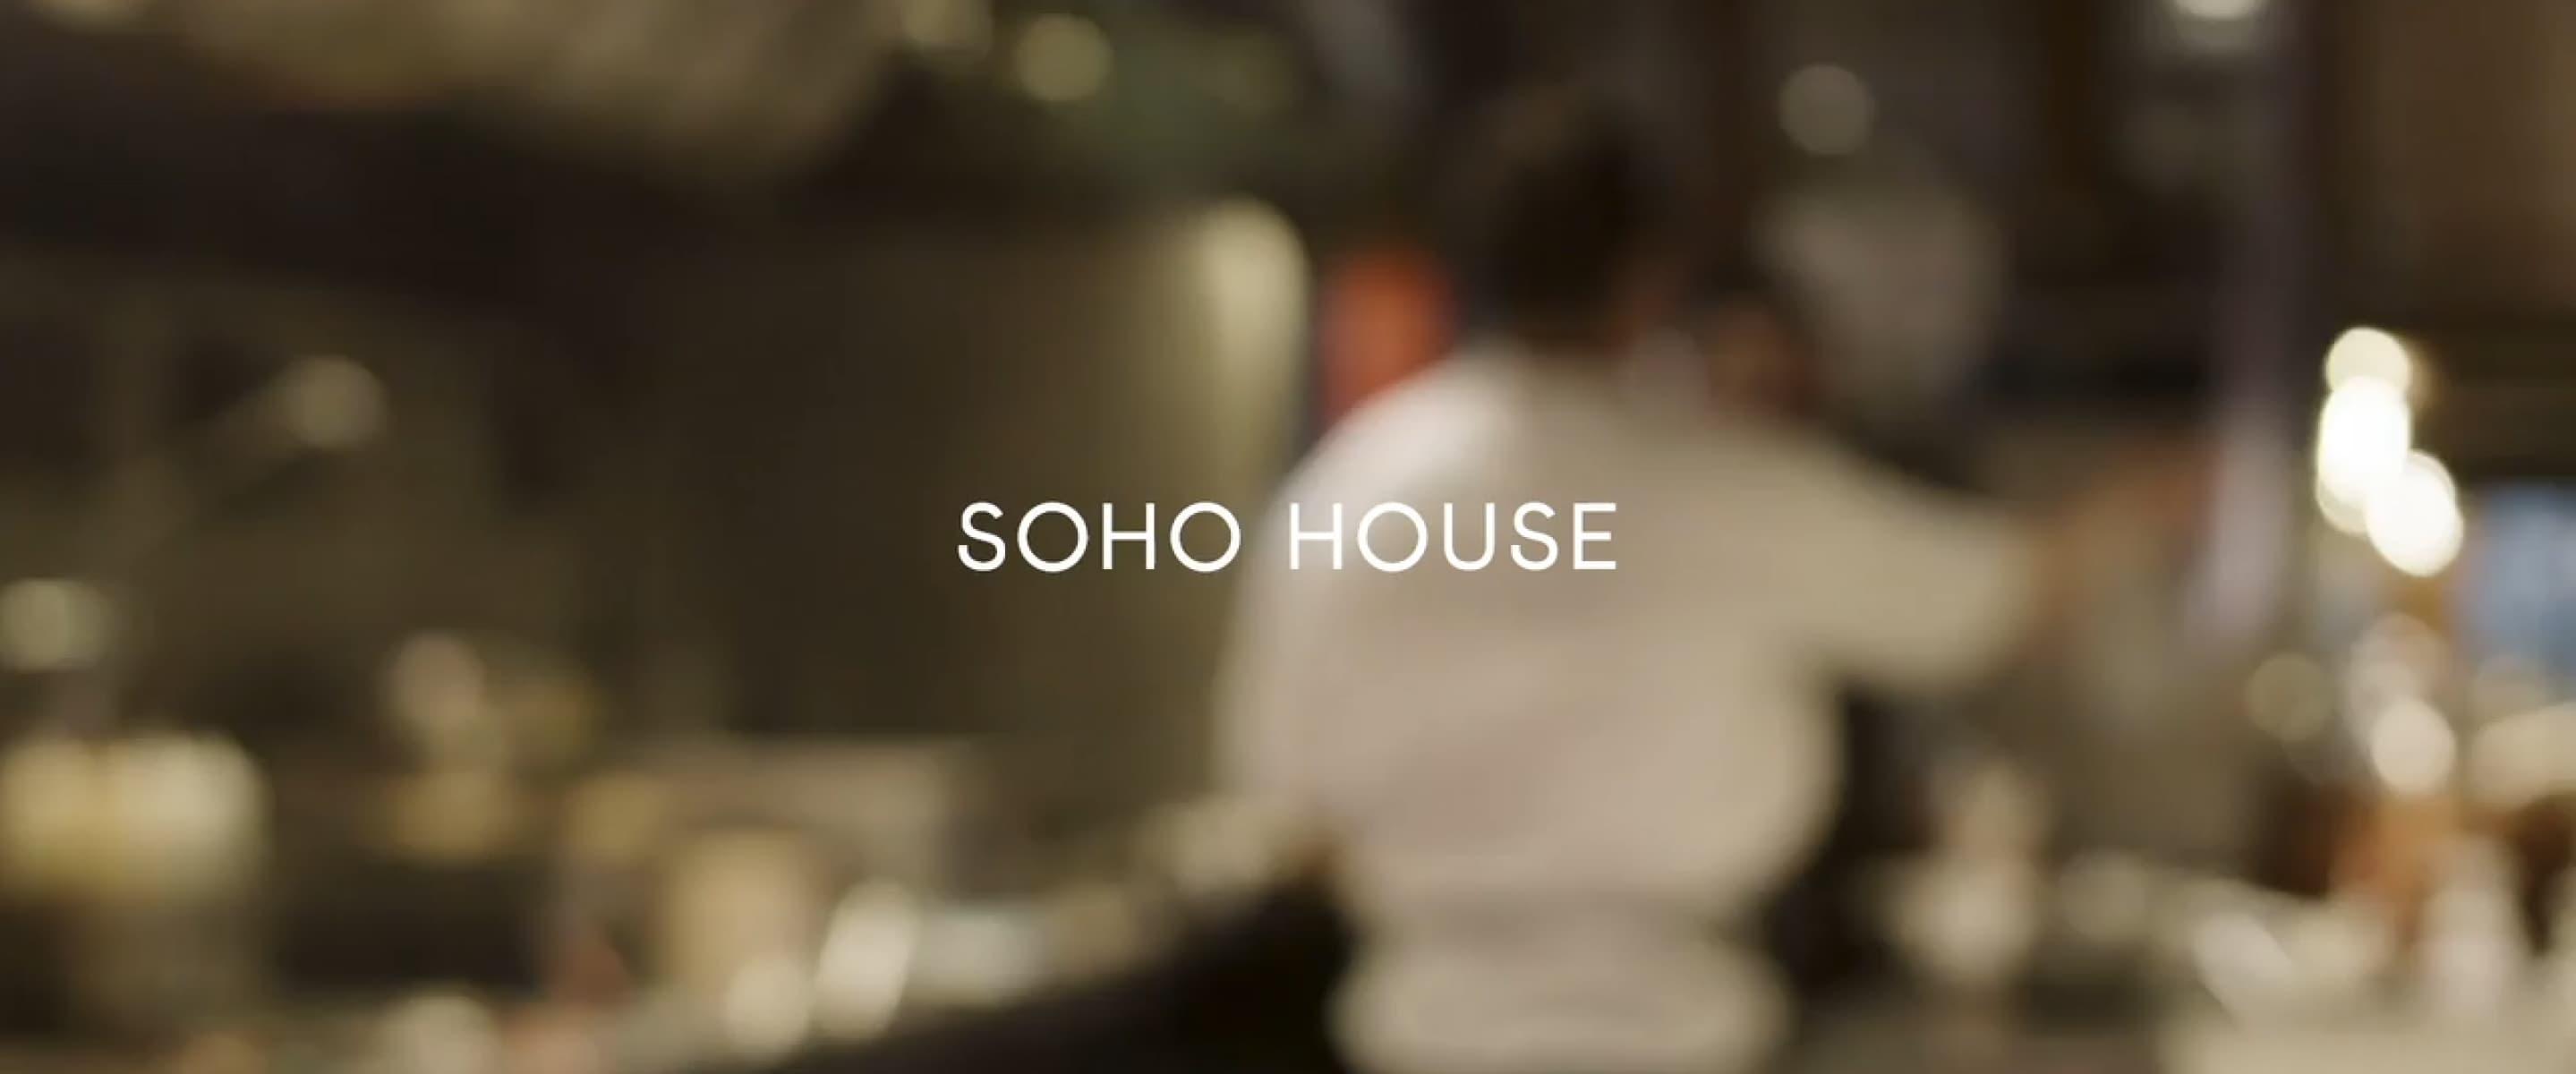 Blurred image of Soho House Video. Blurred image of a person in a kitchen wearing white.